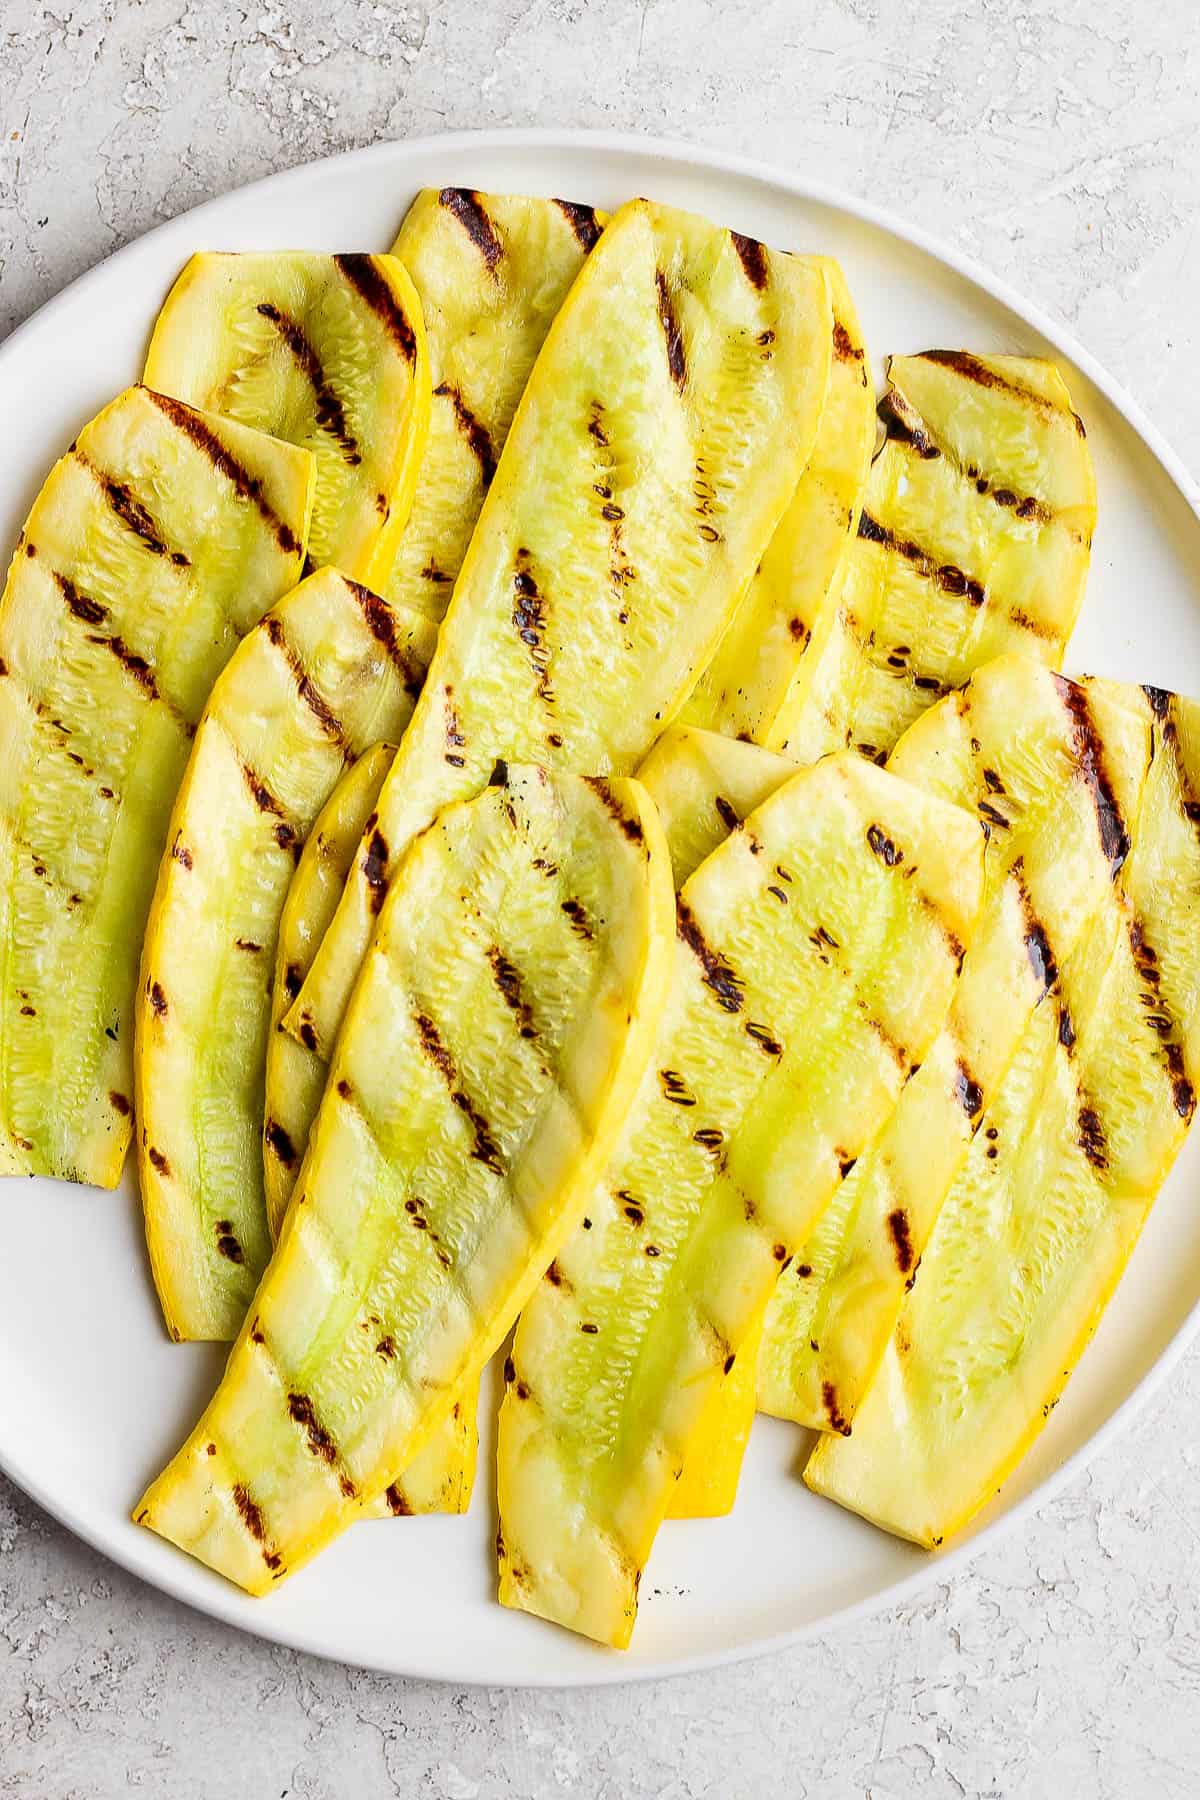 How to easily cook yellow squash on the grill.